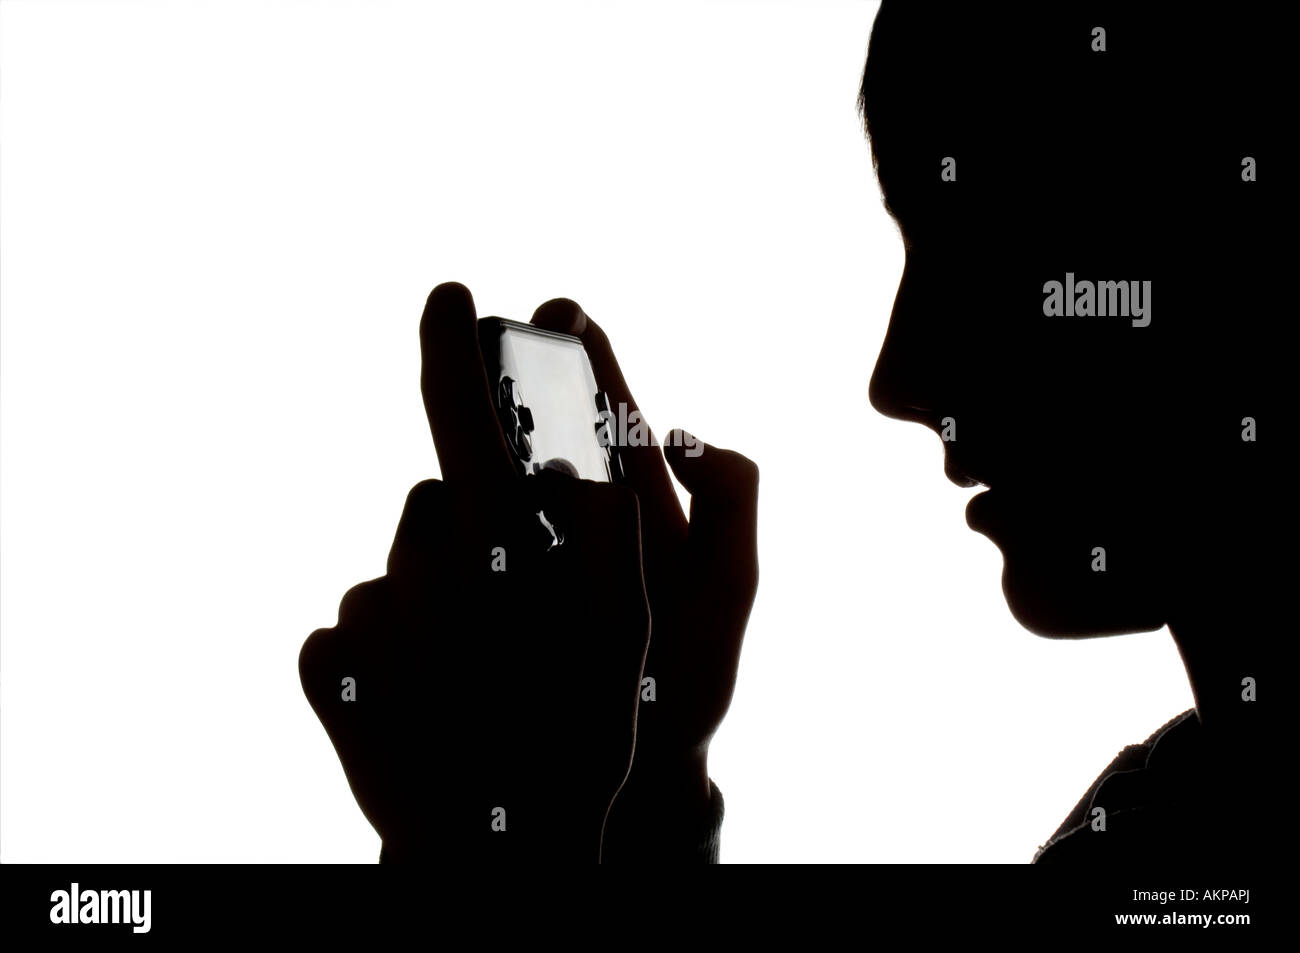 A silhouette of a young teenage boy playing on a Sony PSP hand-held computer game console. Picture by Jim Holden. Stock Photo